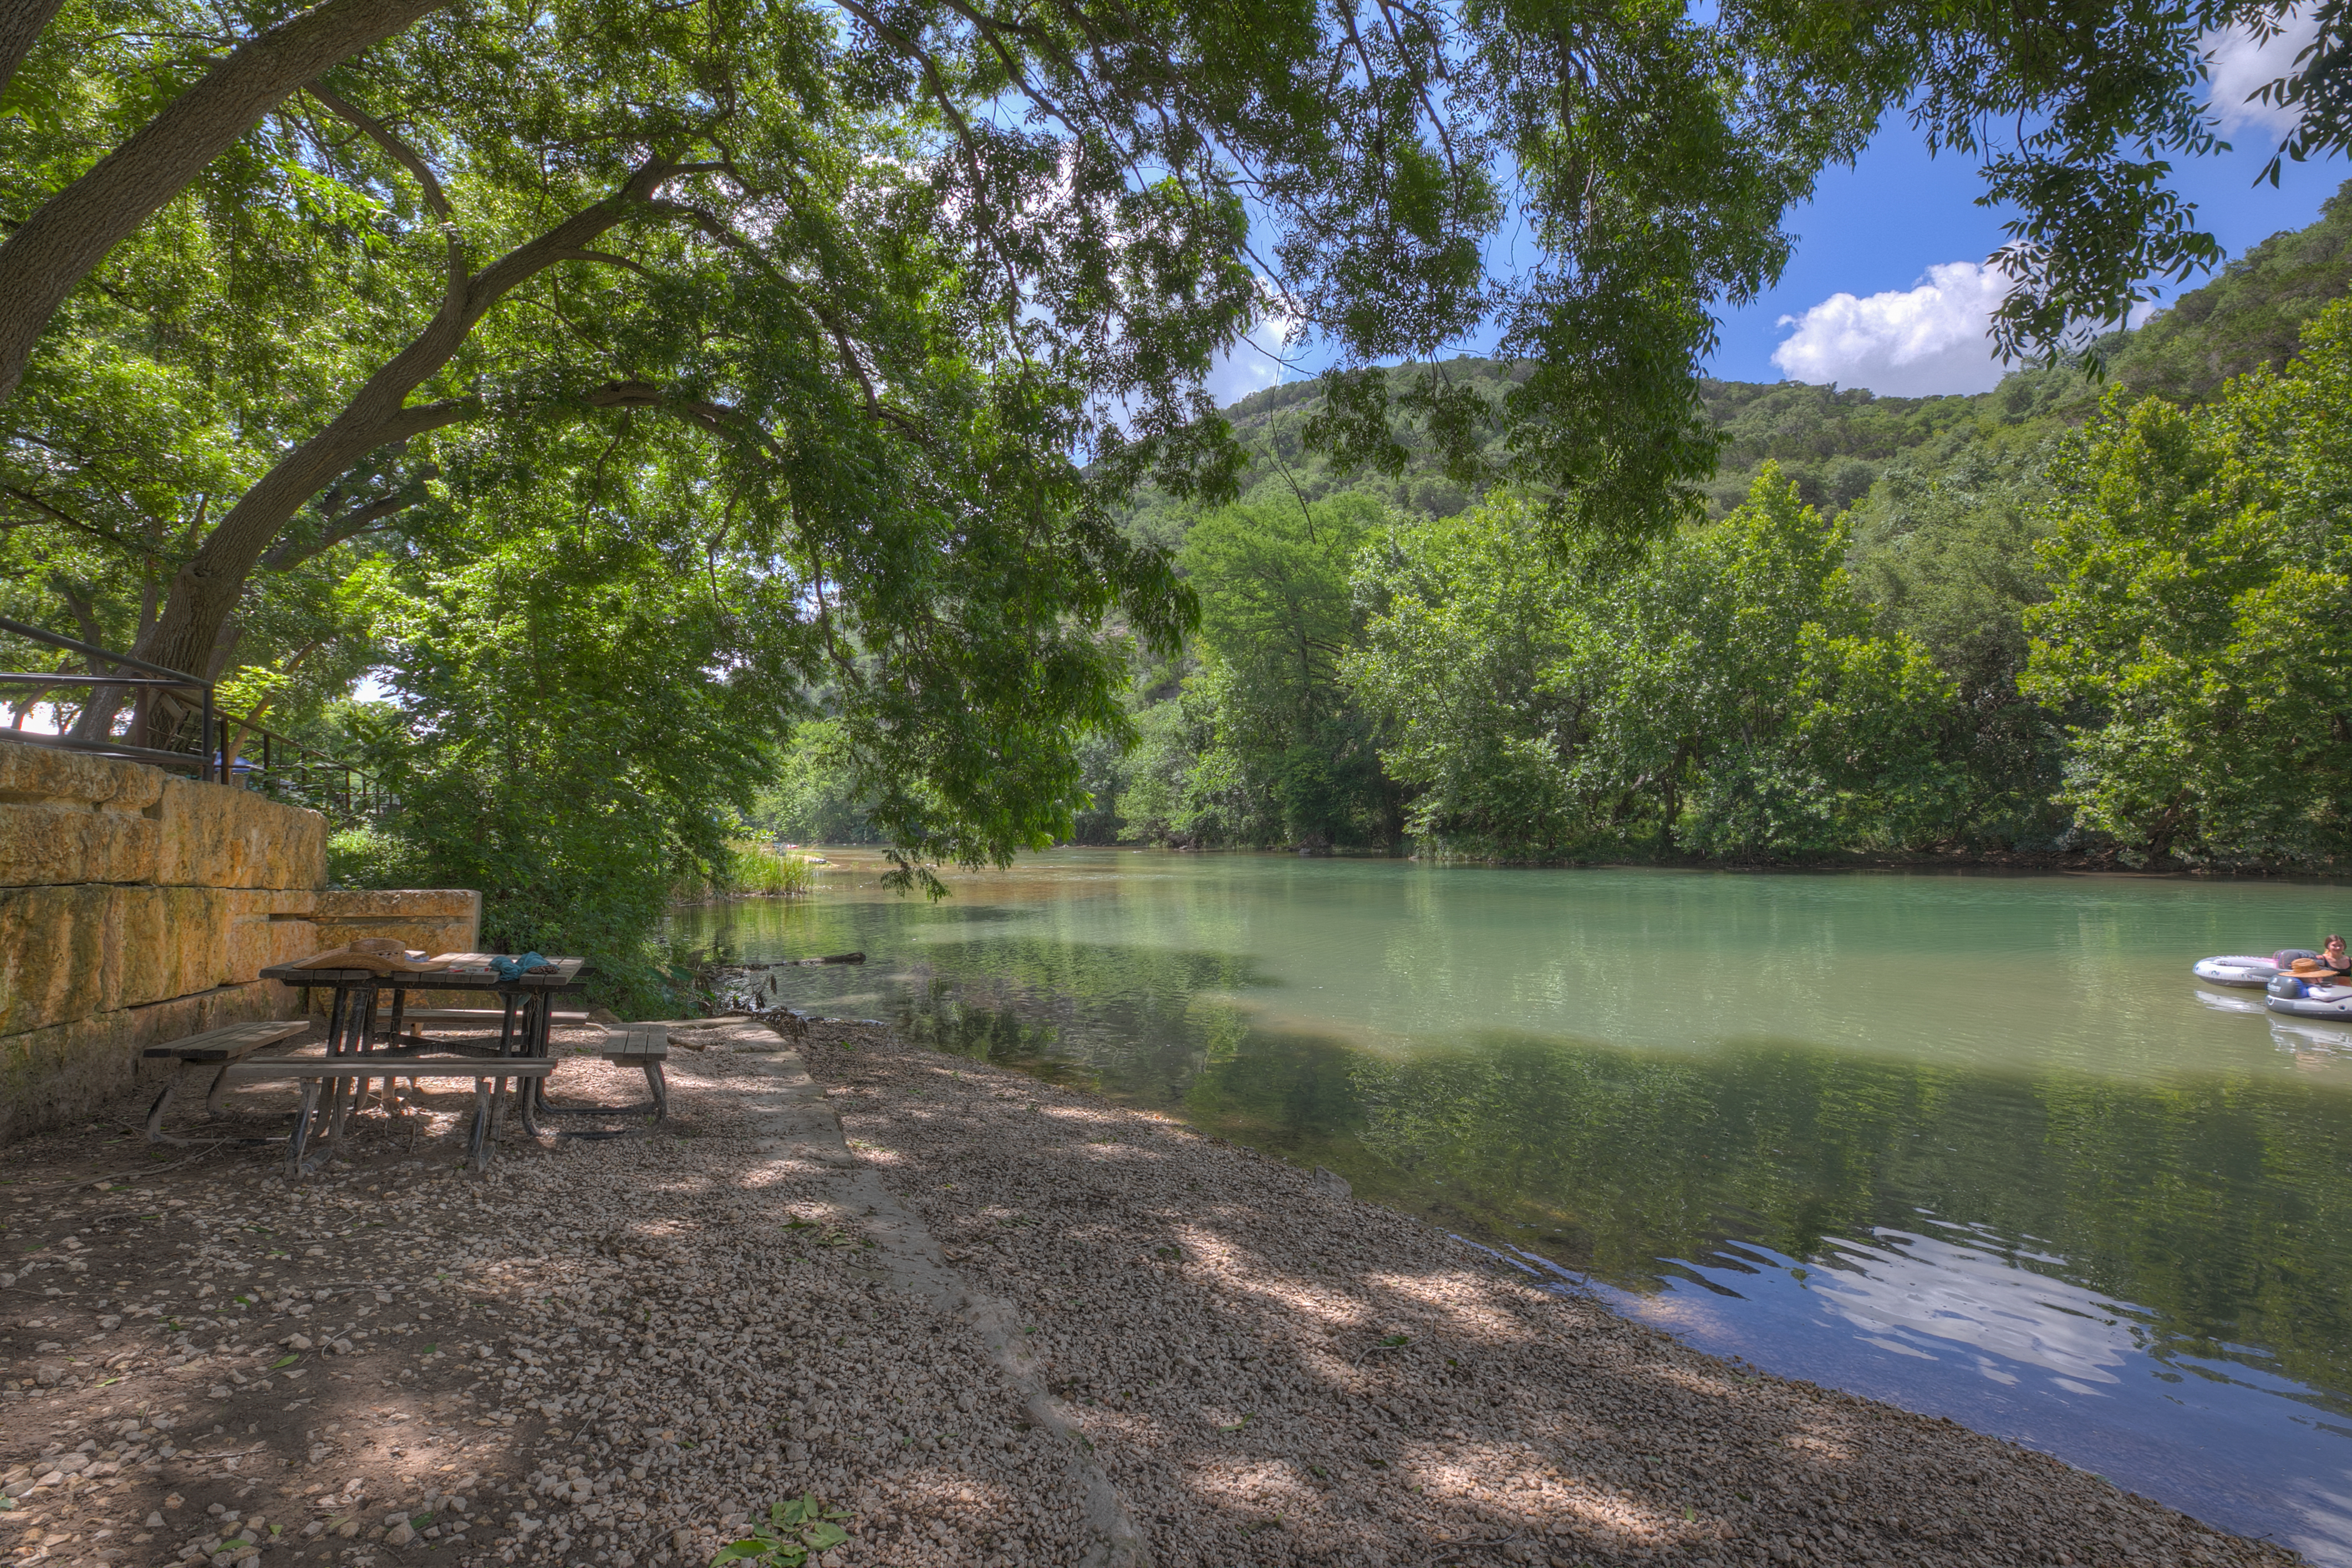 Riverfront access to the Guadalupe River.